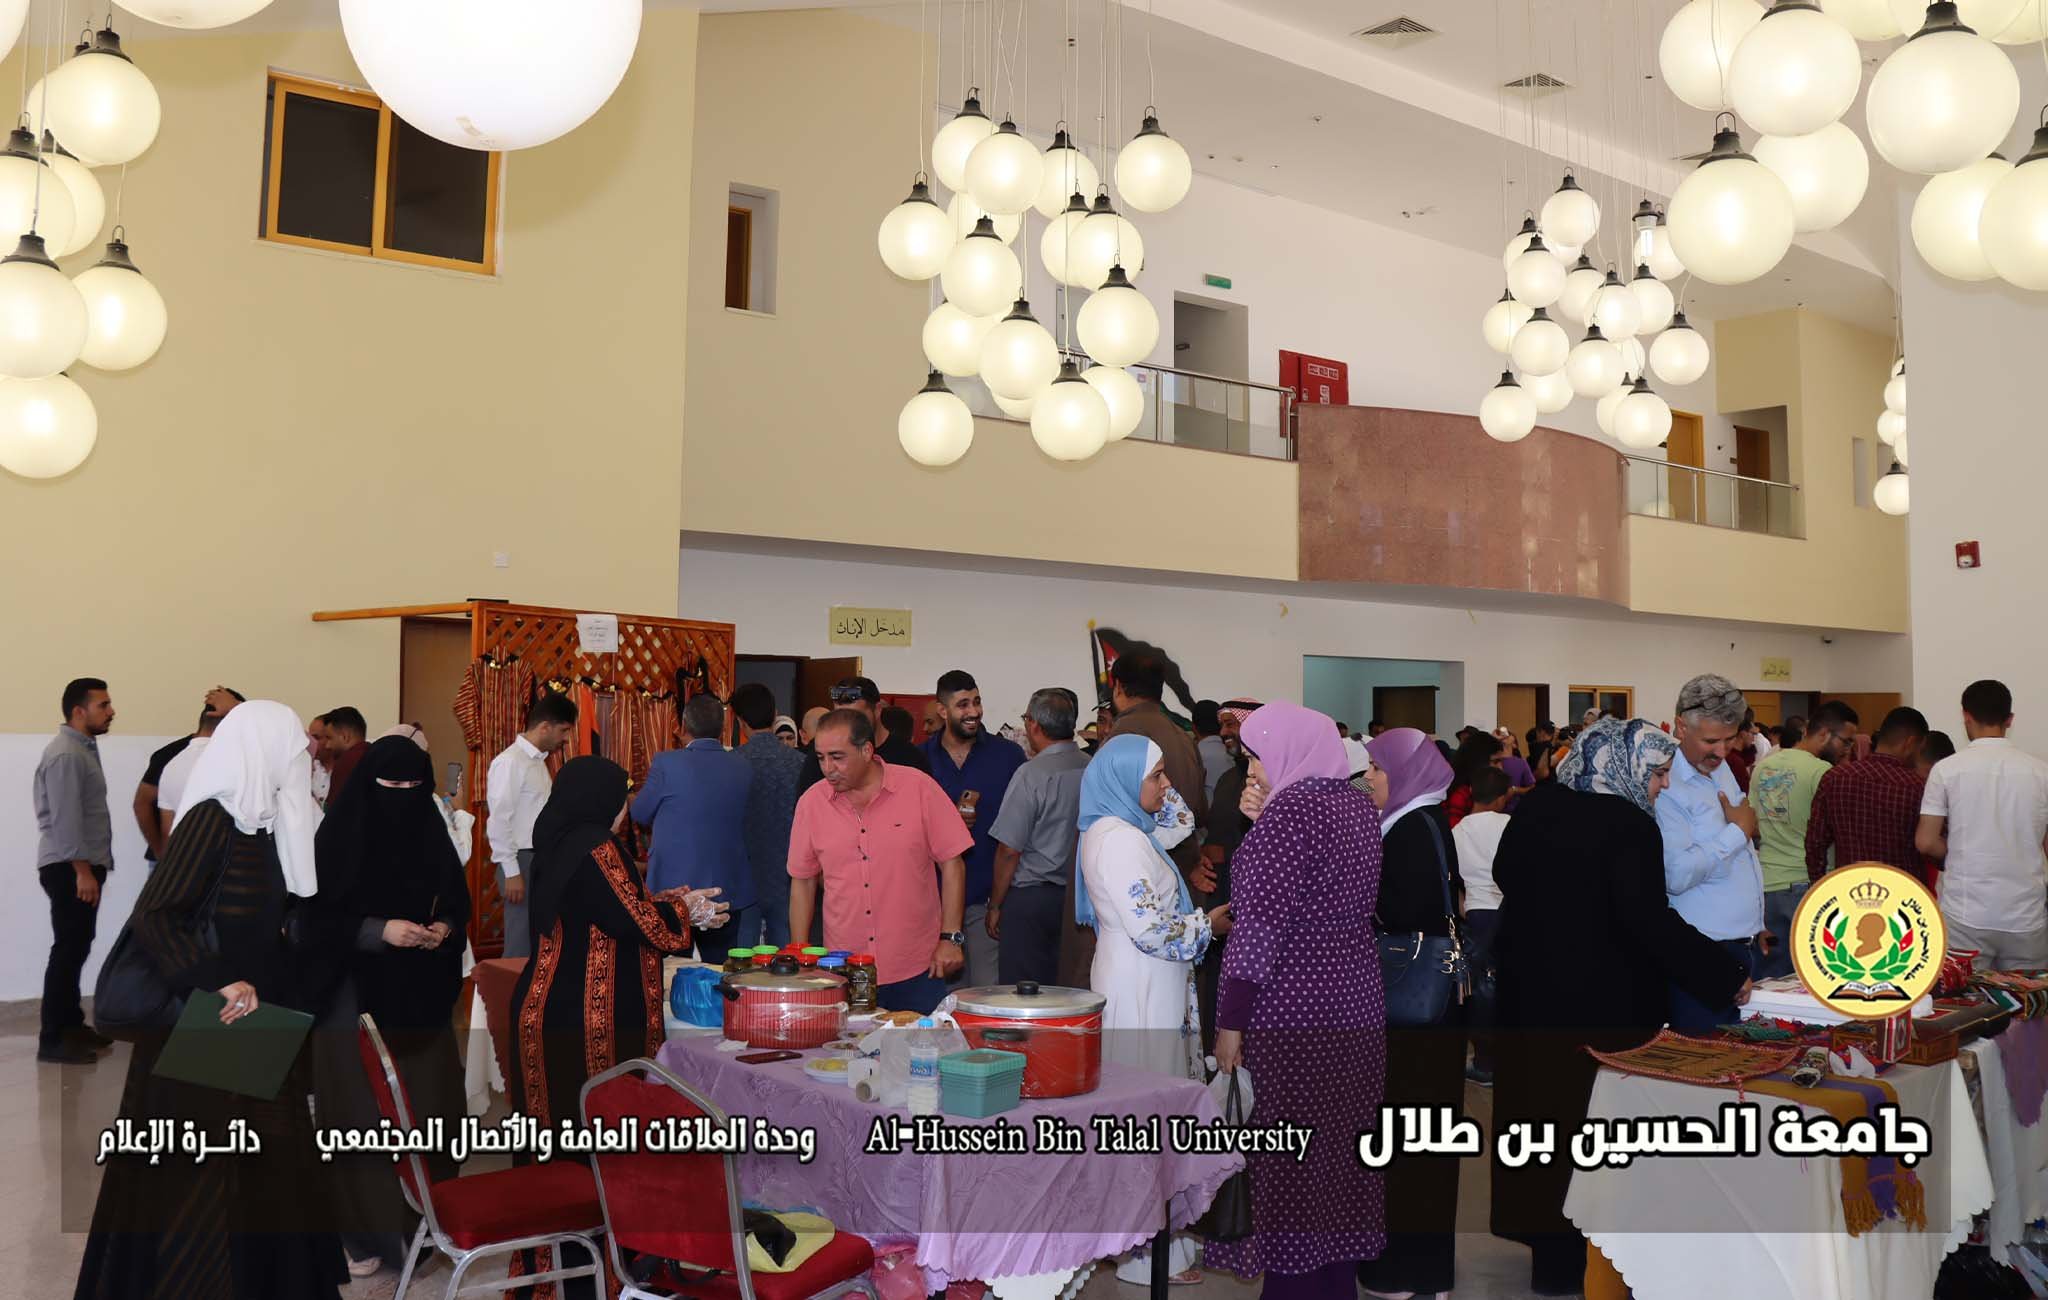 Opening of the Pink City Exhibition to Empower Rural Women at Al-Hussein Bin Talal University.